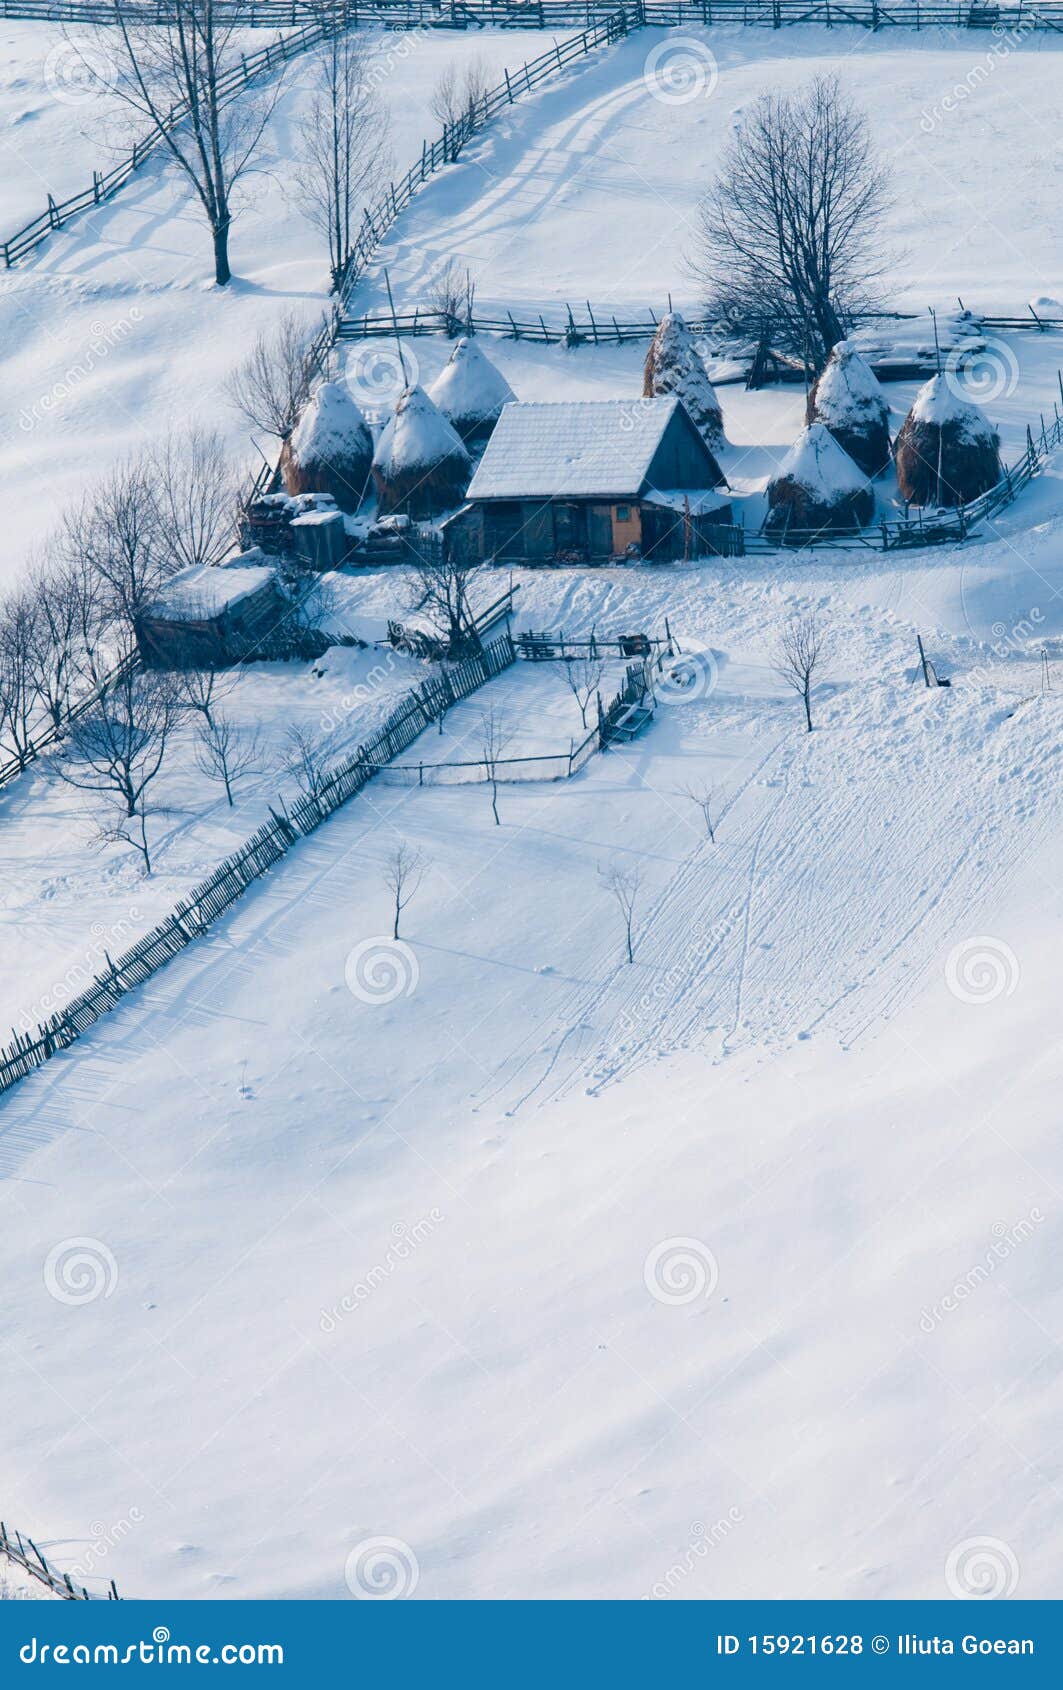 farm, stead in winter at mountains